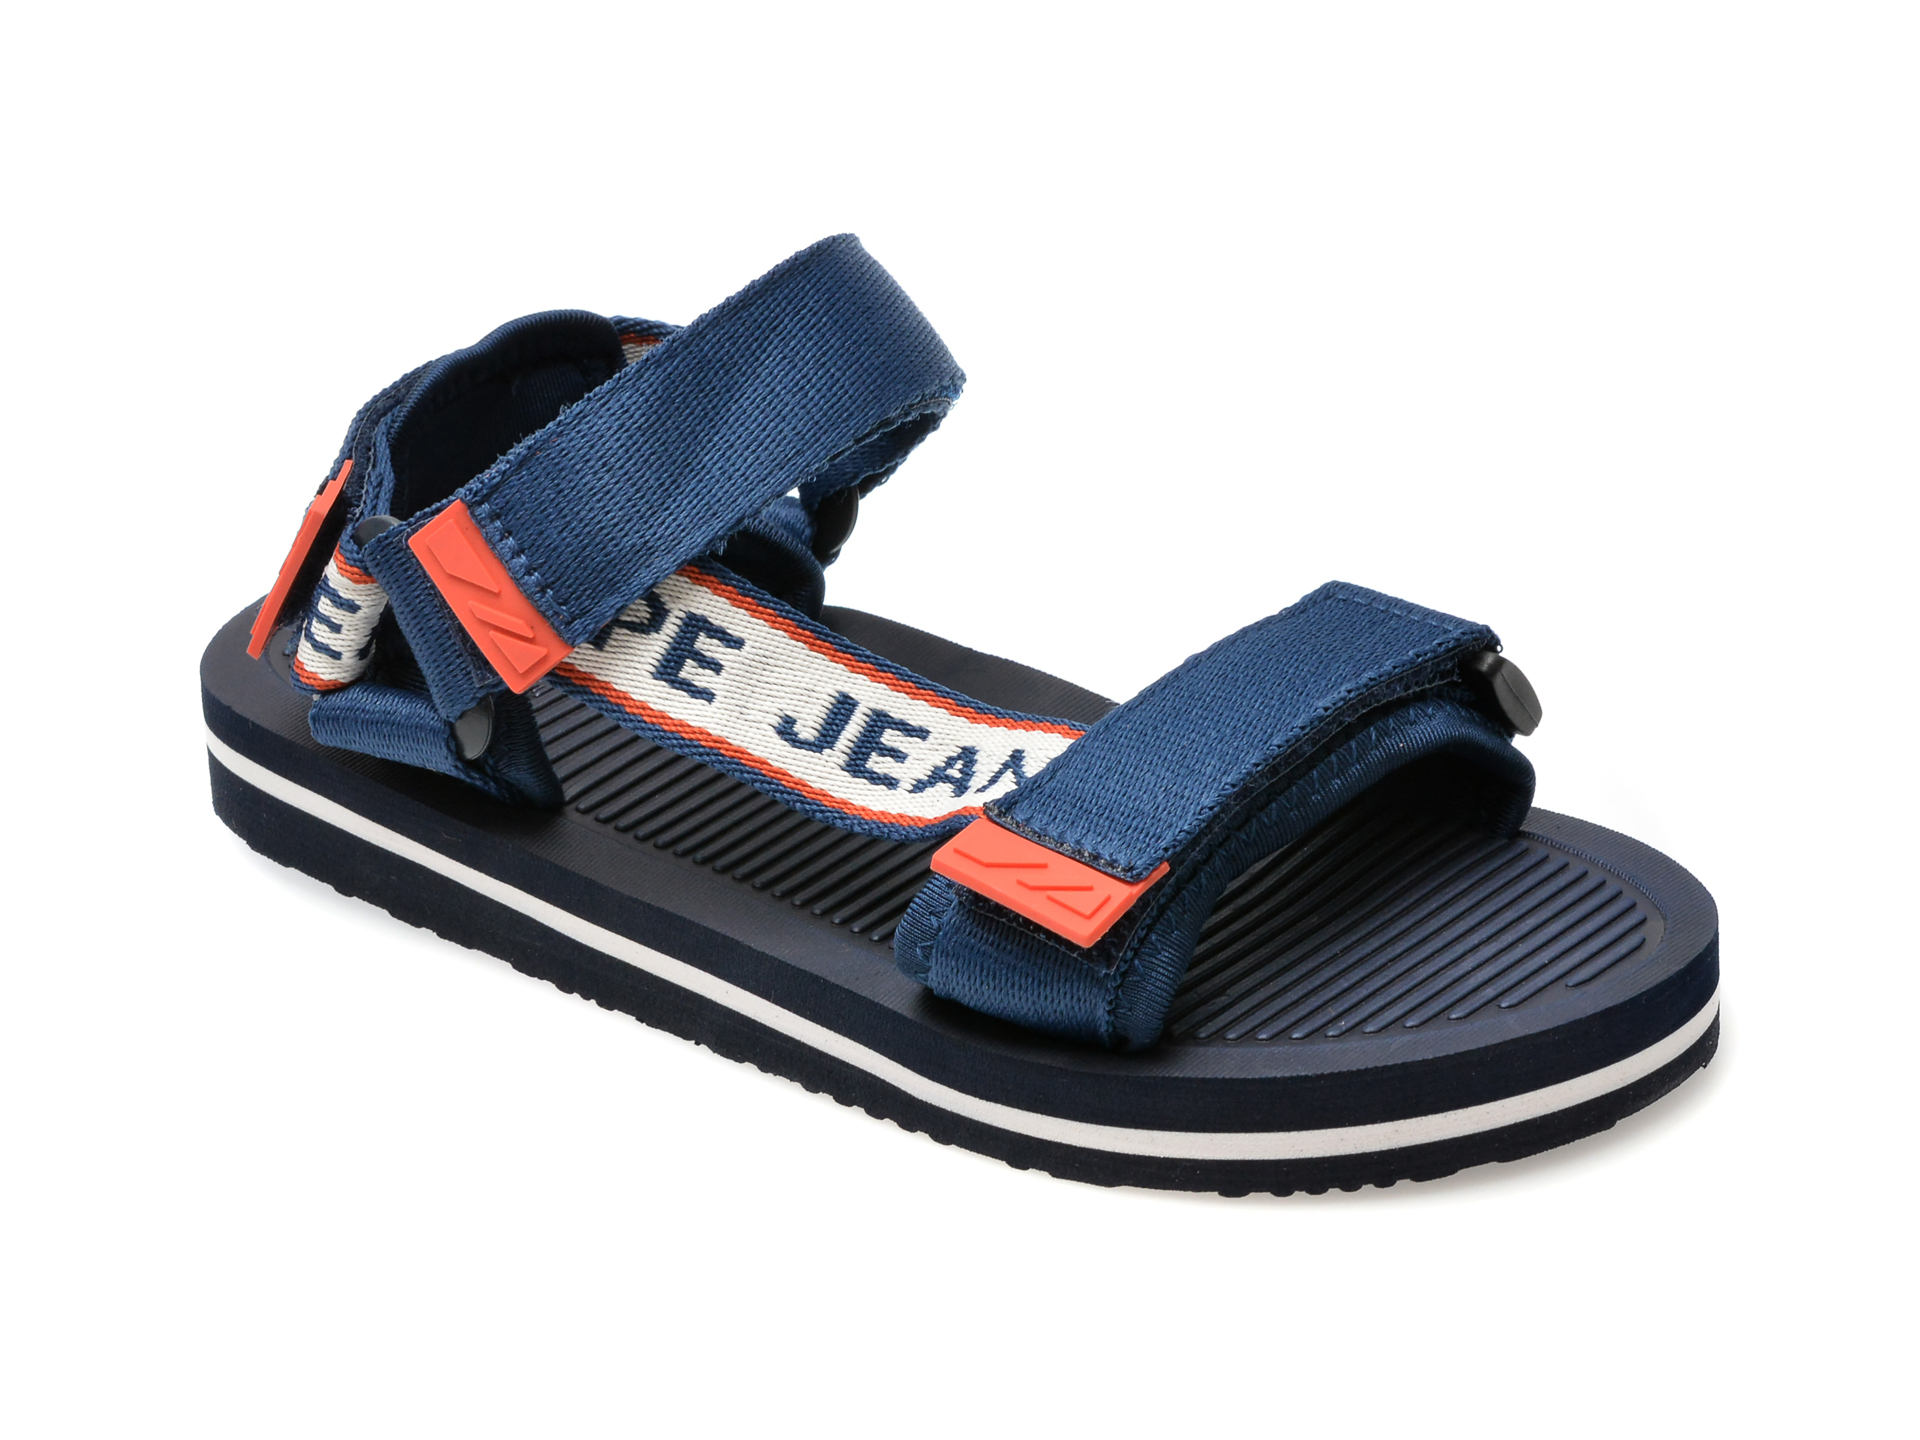 Sandale casual PEPE JEANS bleumarin, BS70063, din material textil